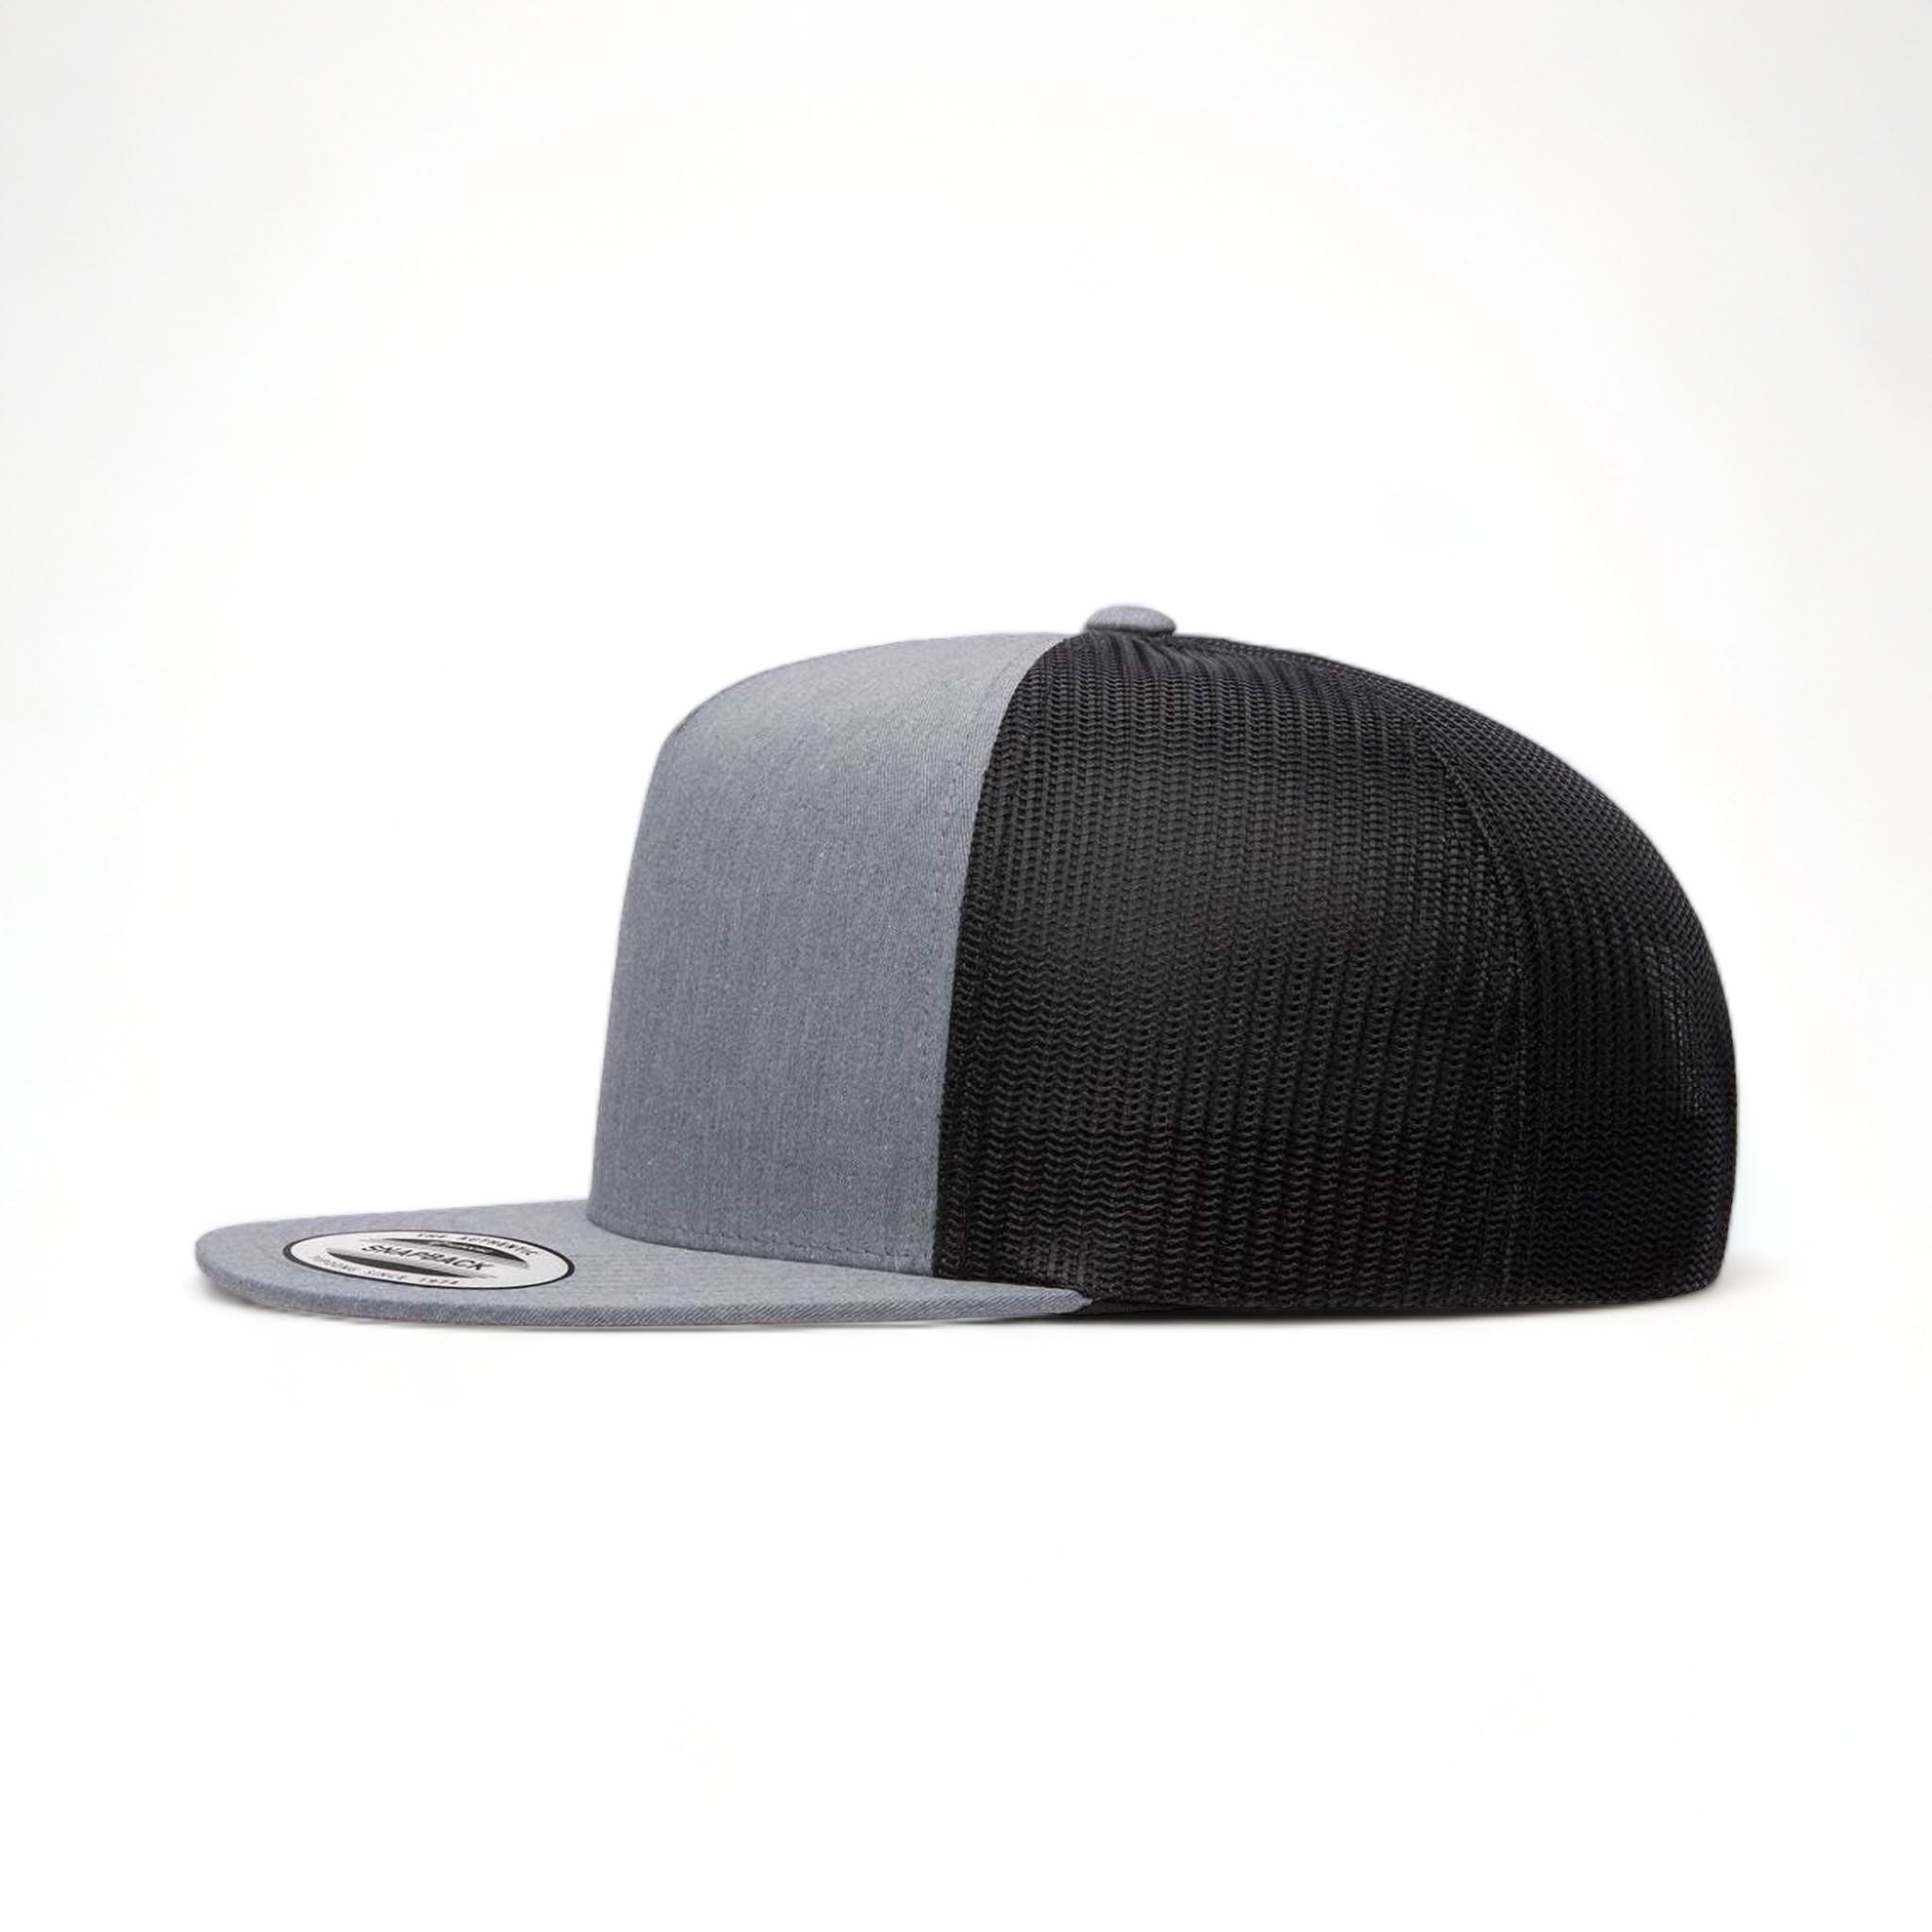 Side view of YP Classics 6006 custom hat in heather and black